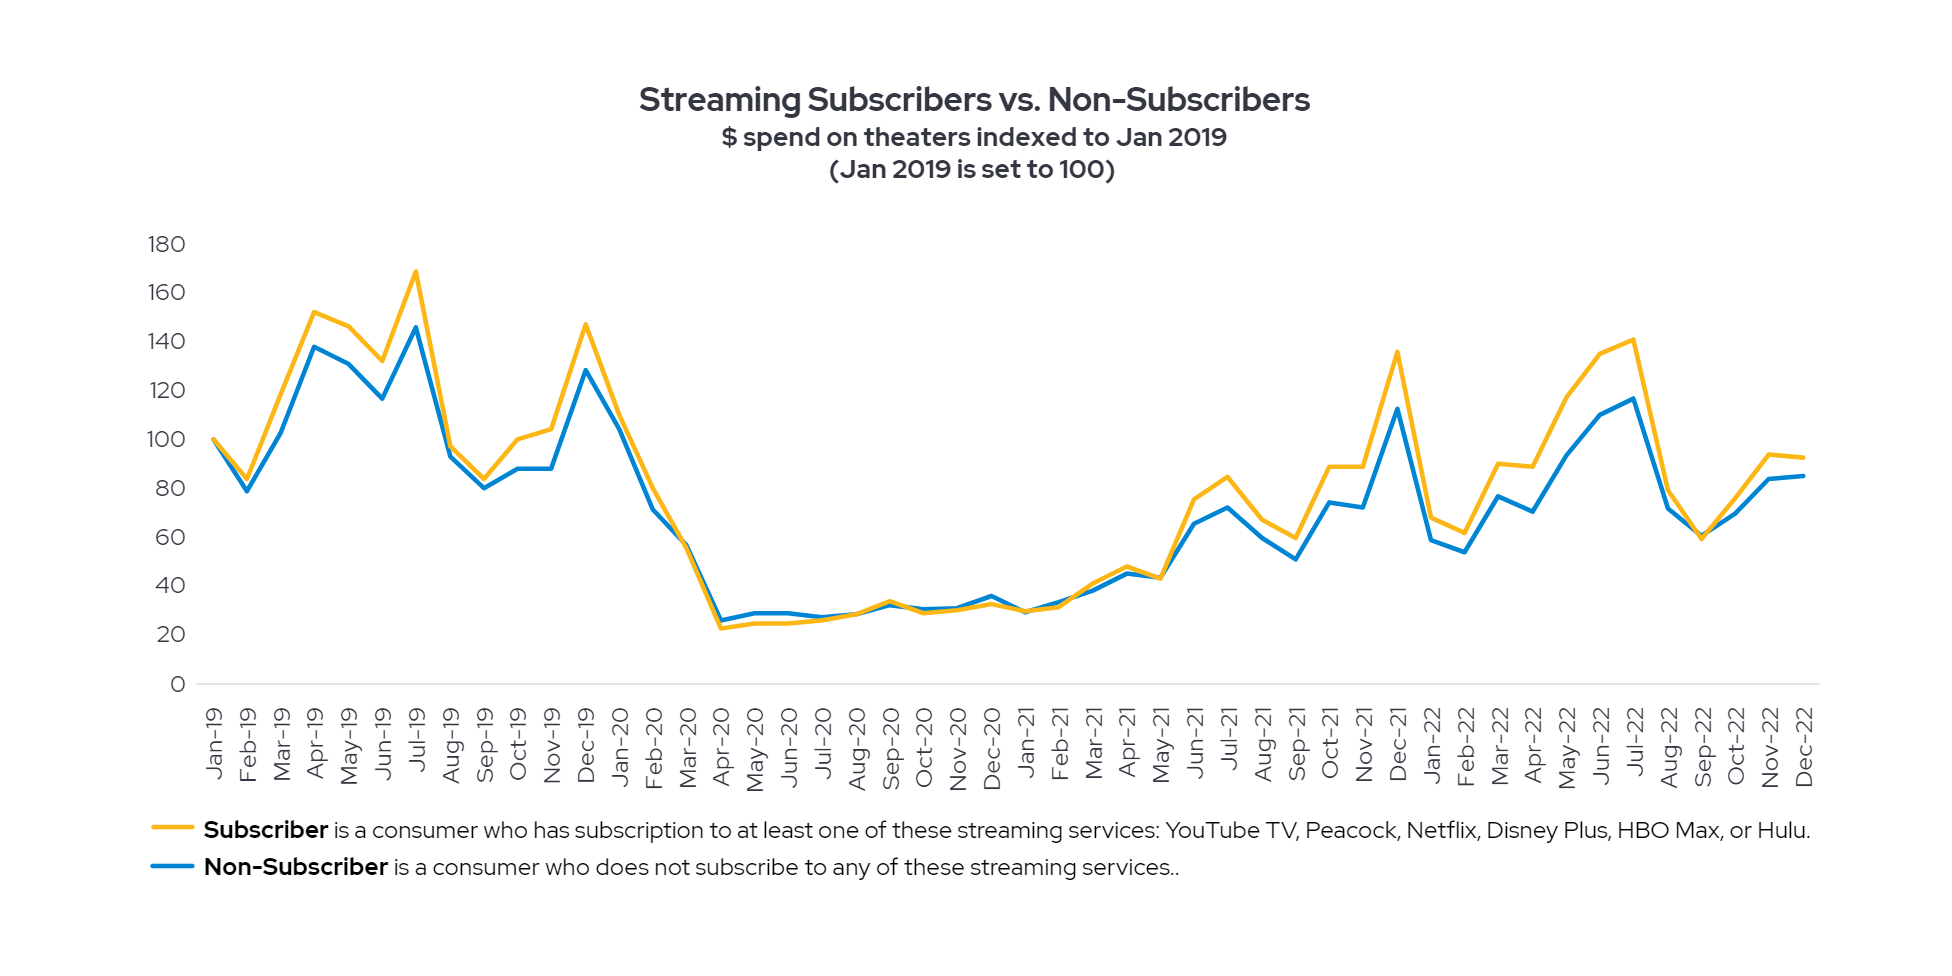 streaming subscribers vs non-streaming subscribers